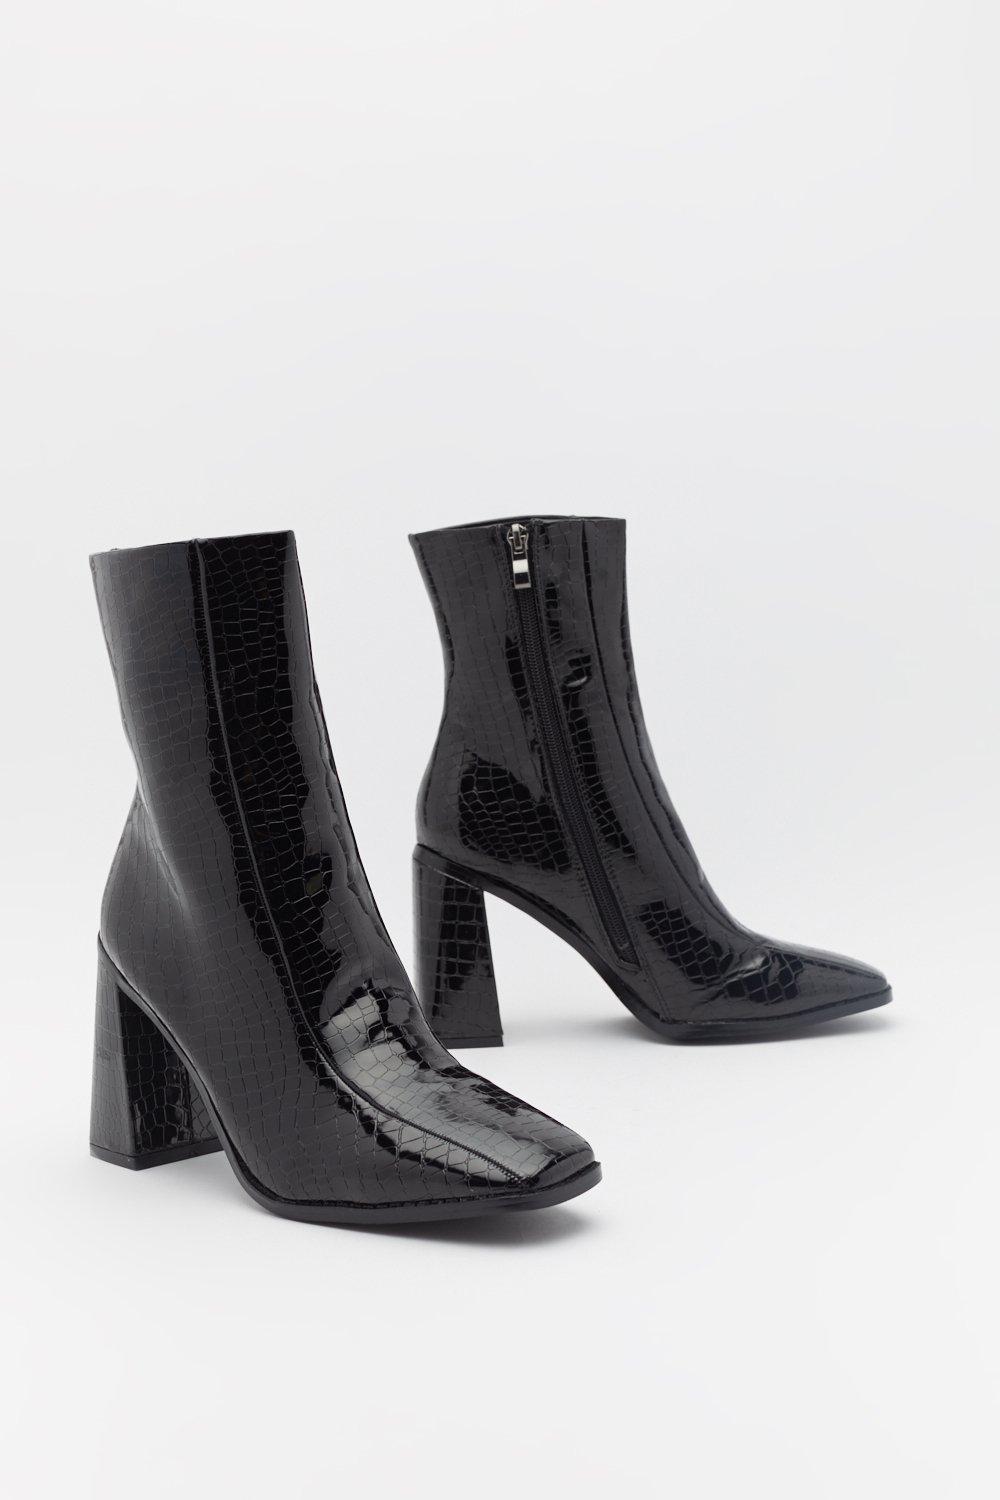 black leather square toe boots